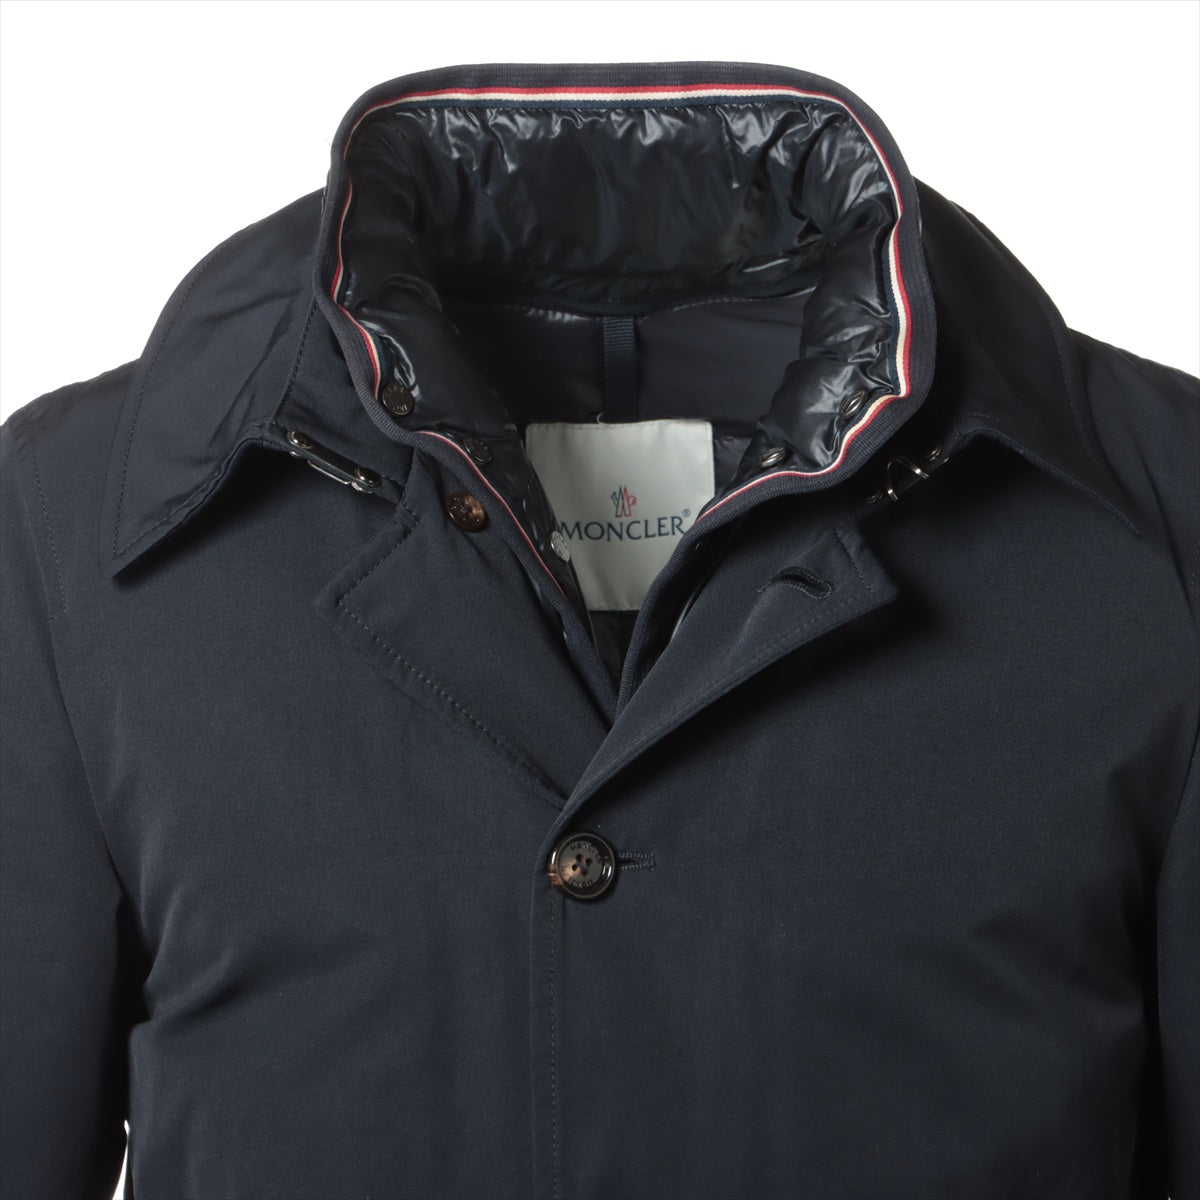 Moncler 11 years Cotton x polyester x nylon Down coat 0 Men's Navy blue  GASPARD Removable liner collar